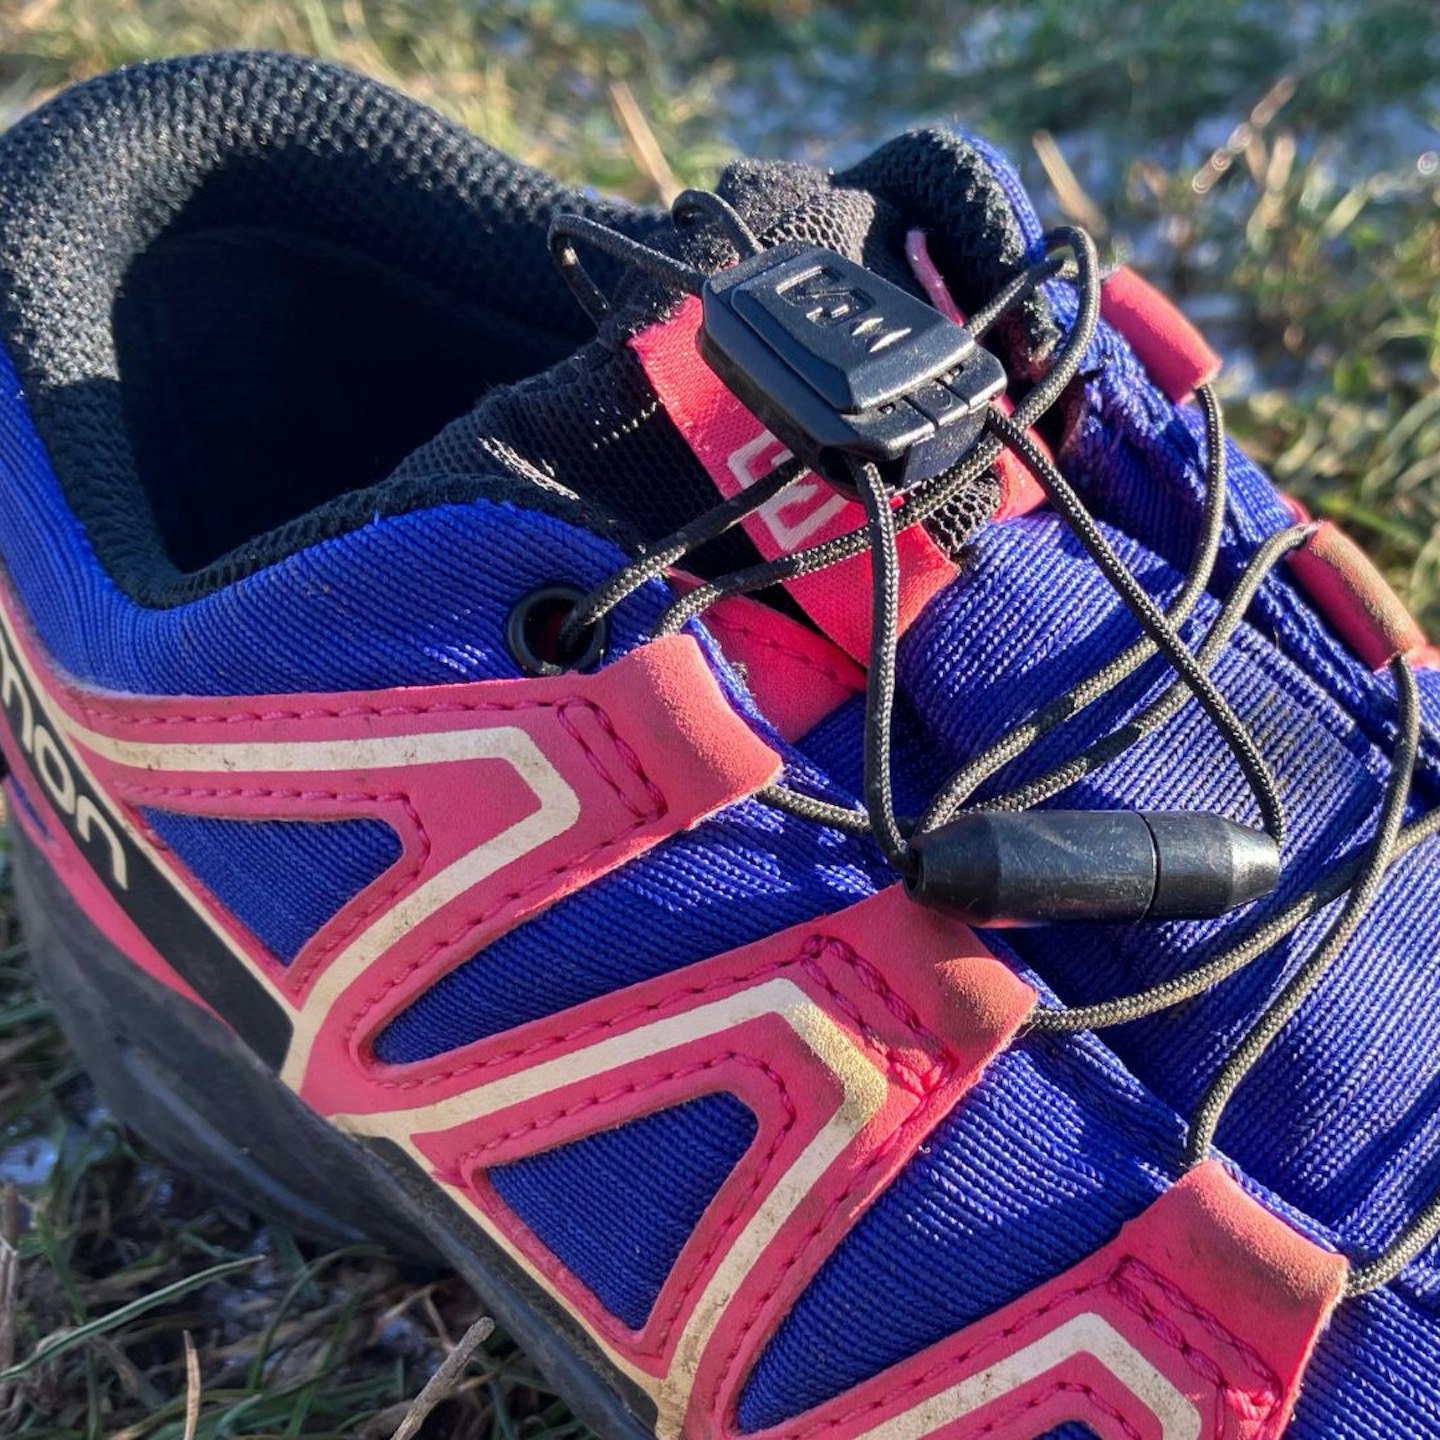 Quicklace system on the Salomon Speedcross CSWP Junior running shoe for kids